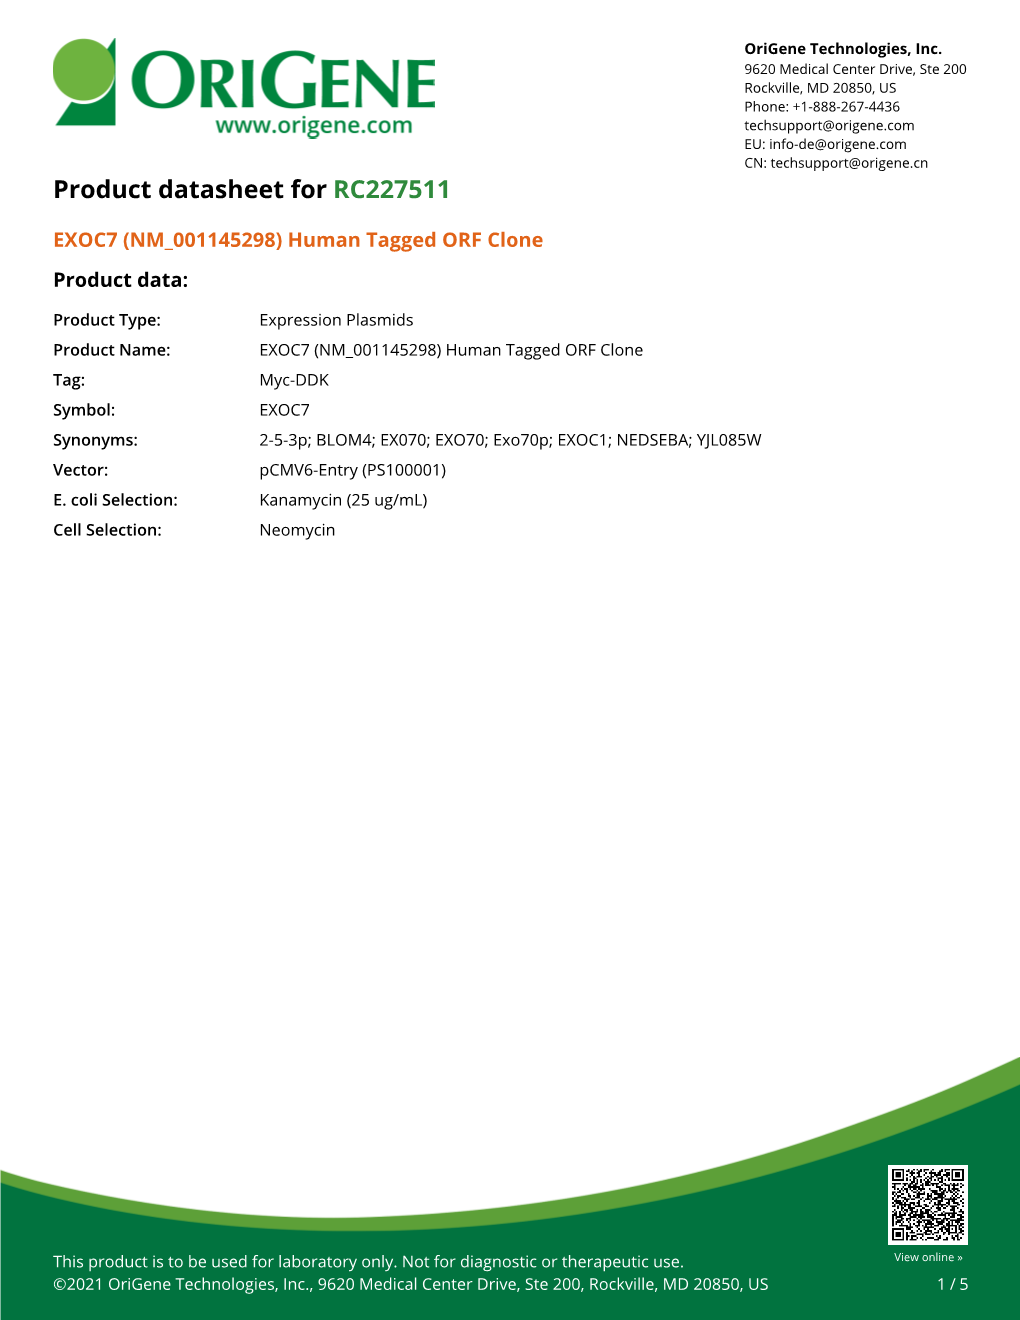 EXOC7 (NM 001145298) Human Tagged ORF Clone Product Data